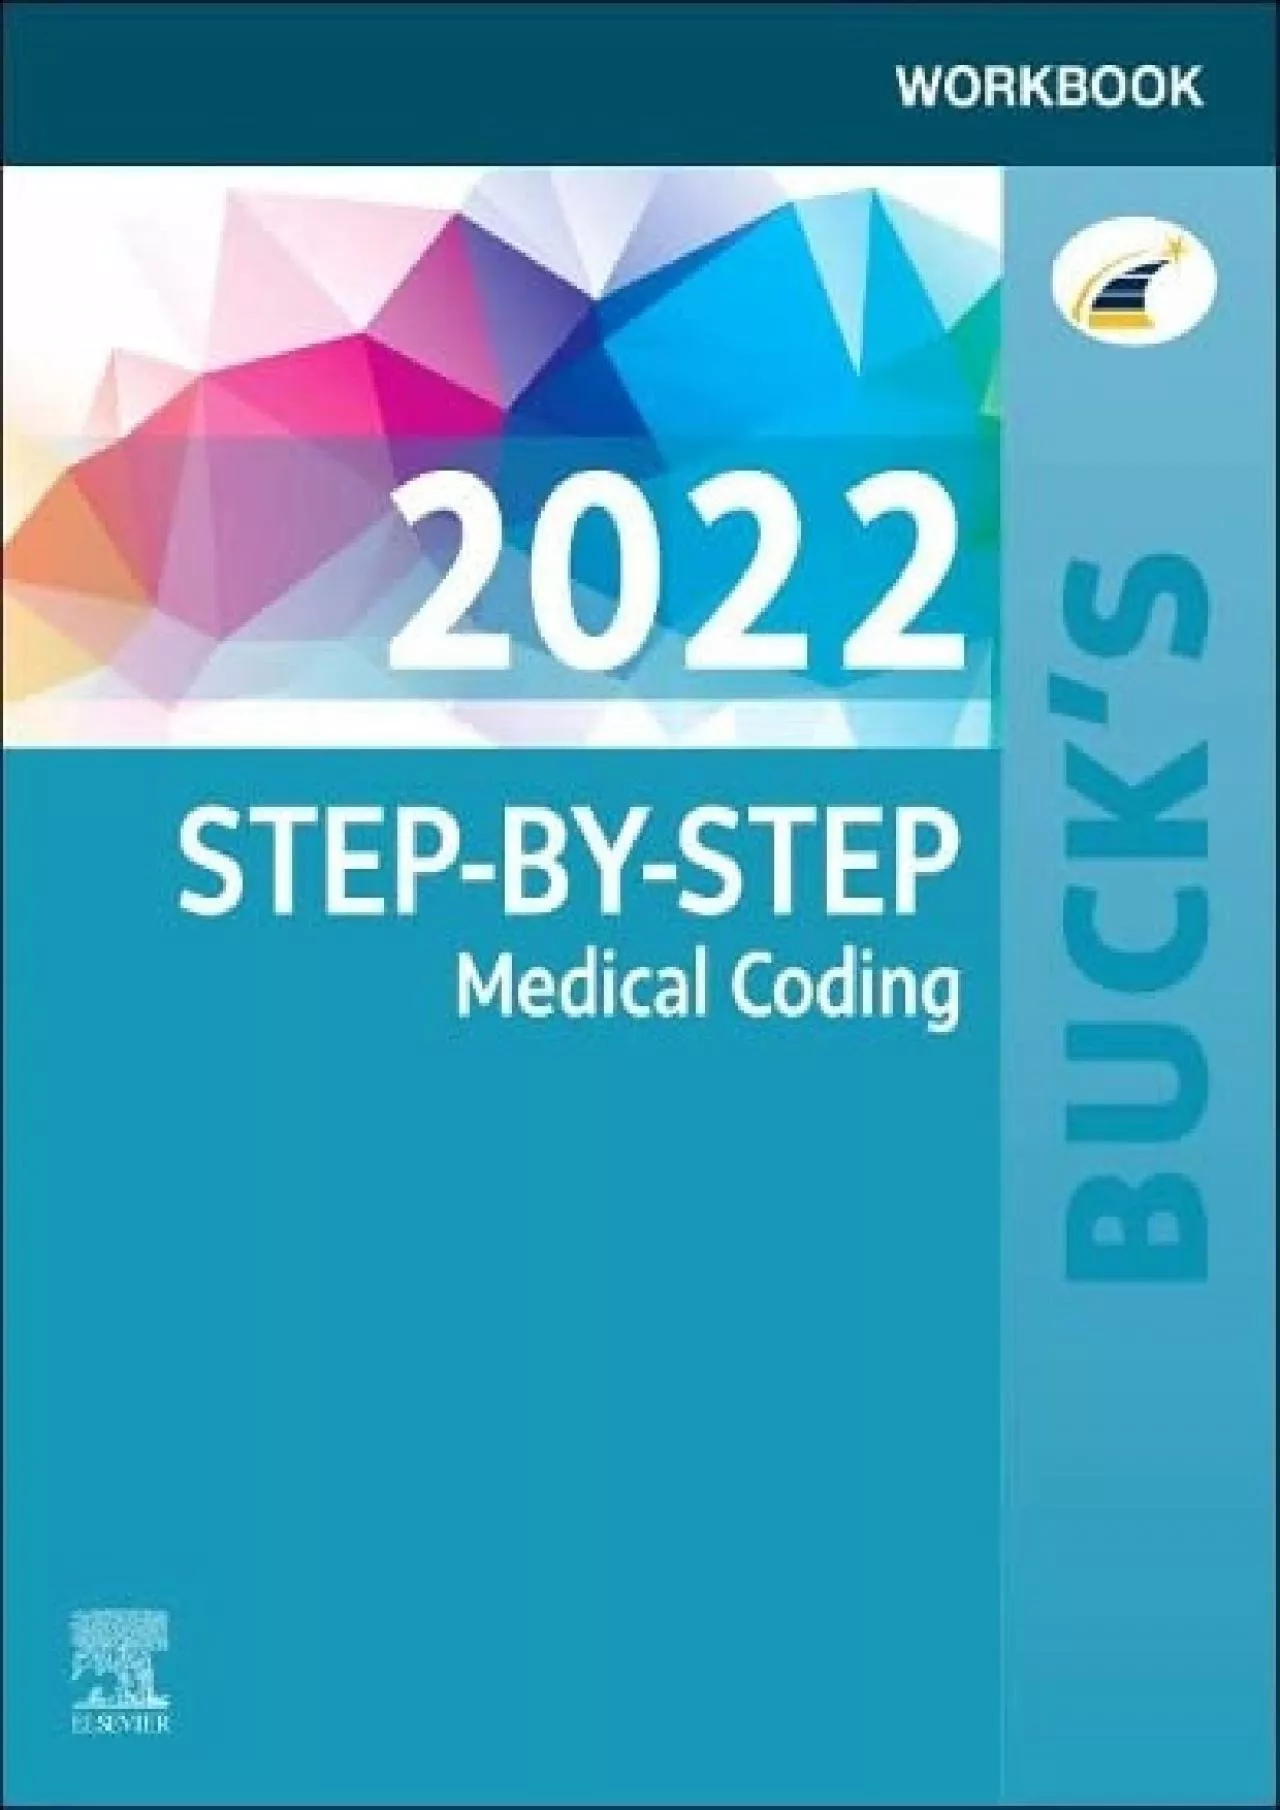 (READ)-Buck\'s Workbook for Step-by-Step Medical Coding, 2022 Edition